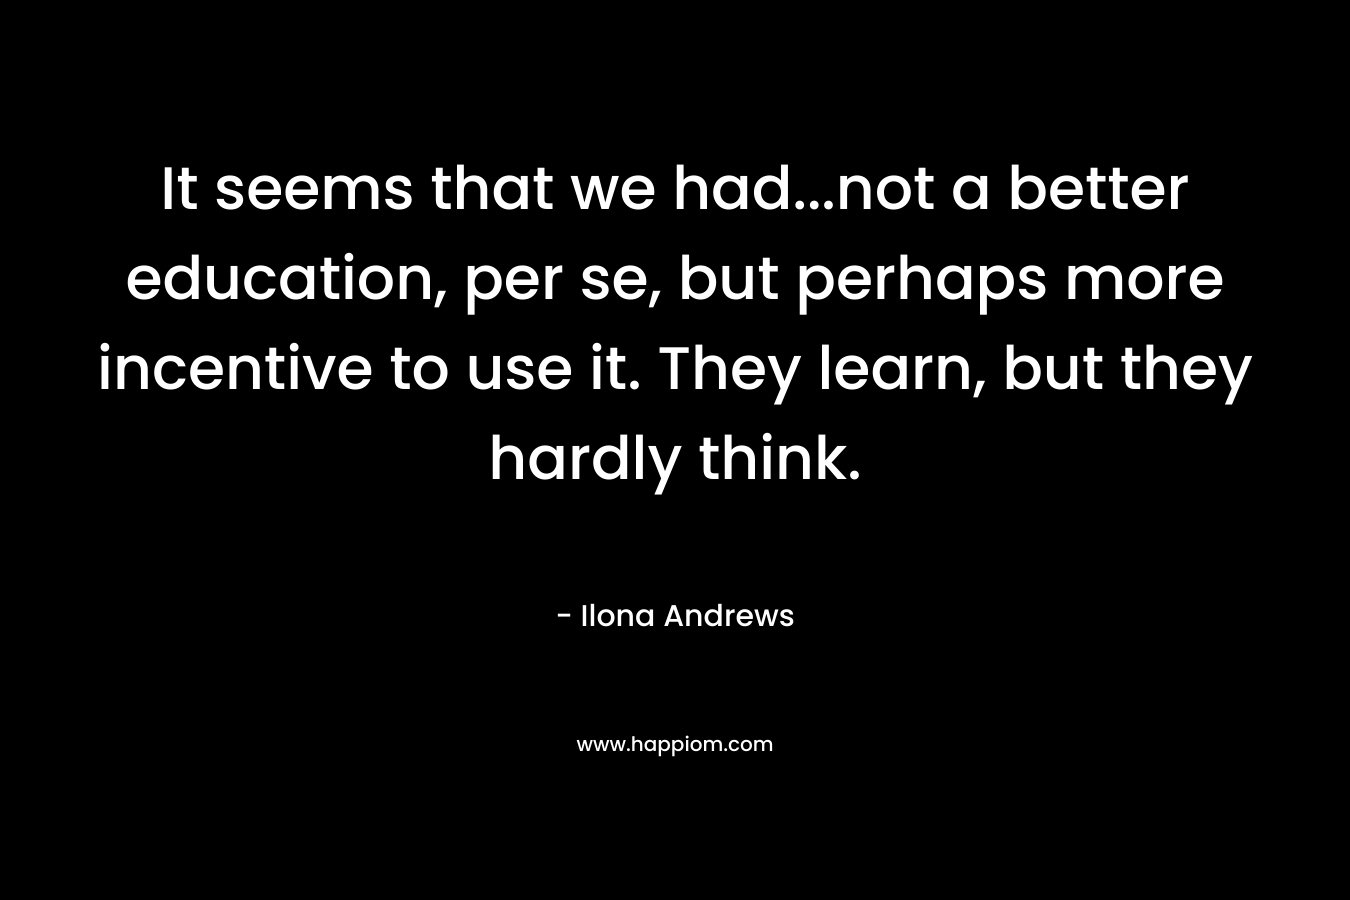 It seems that we had…not a better education, per se, but perhaps more incentive to use it. They learn, but they hardly think. – Ilona Andrews